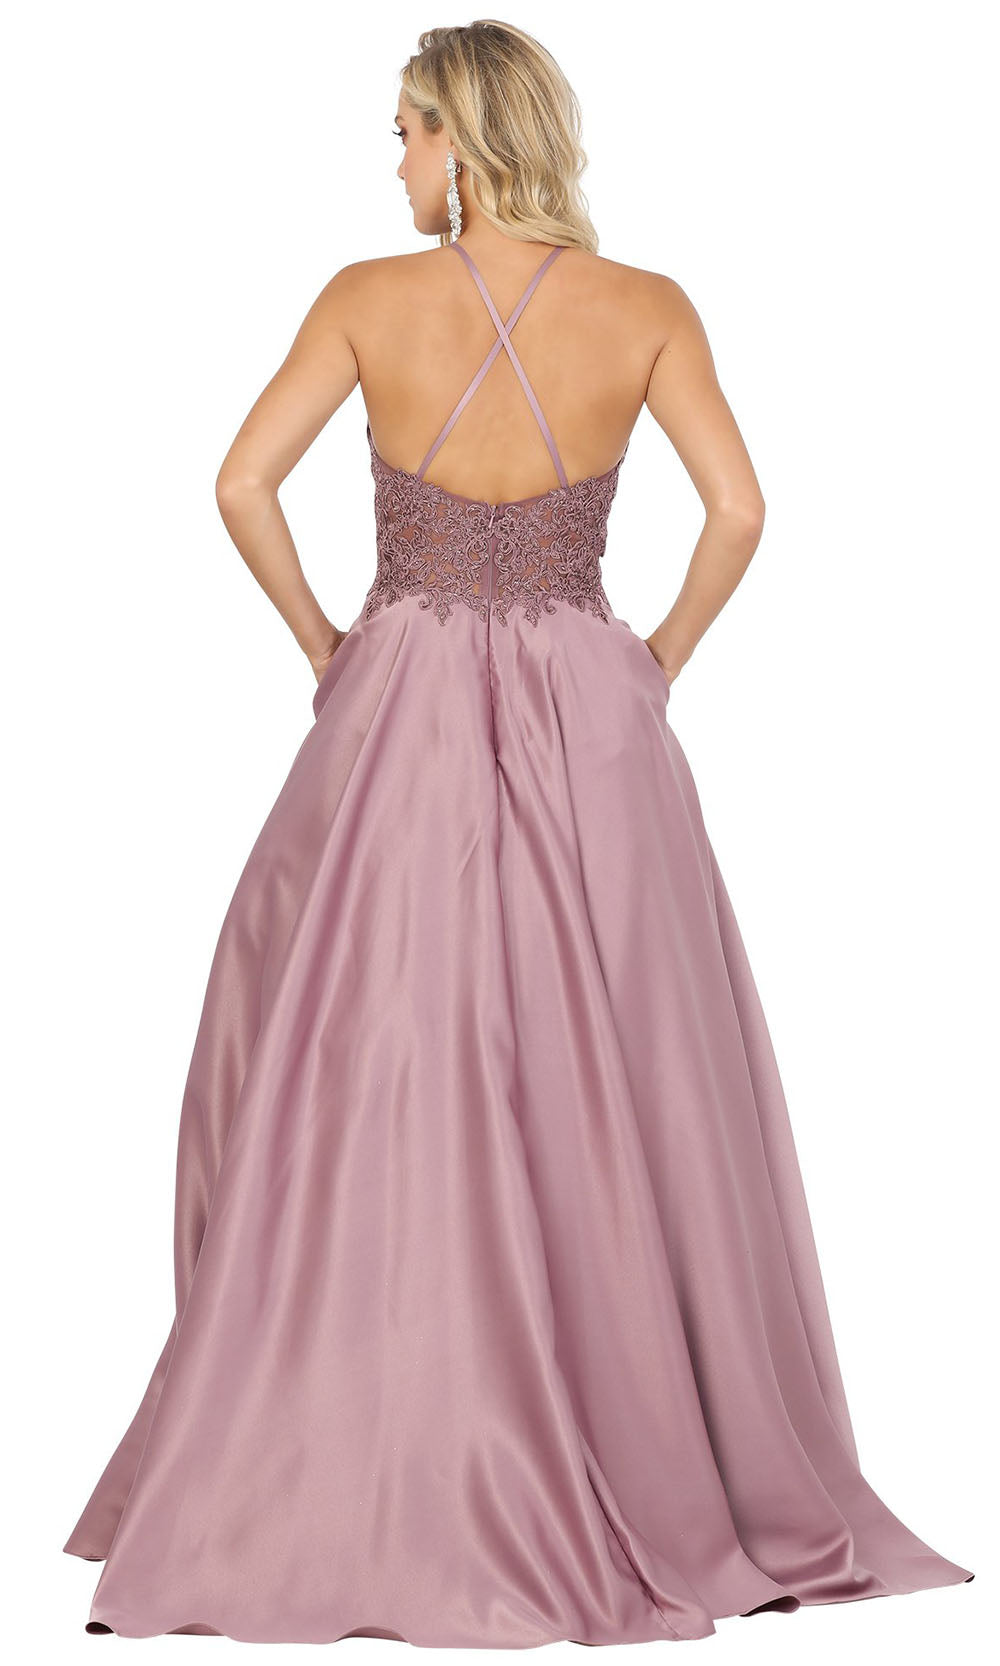 Dancing Queen - 2625 Embroidered Halter Neck A-Line Dress In Brown